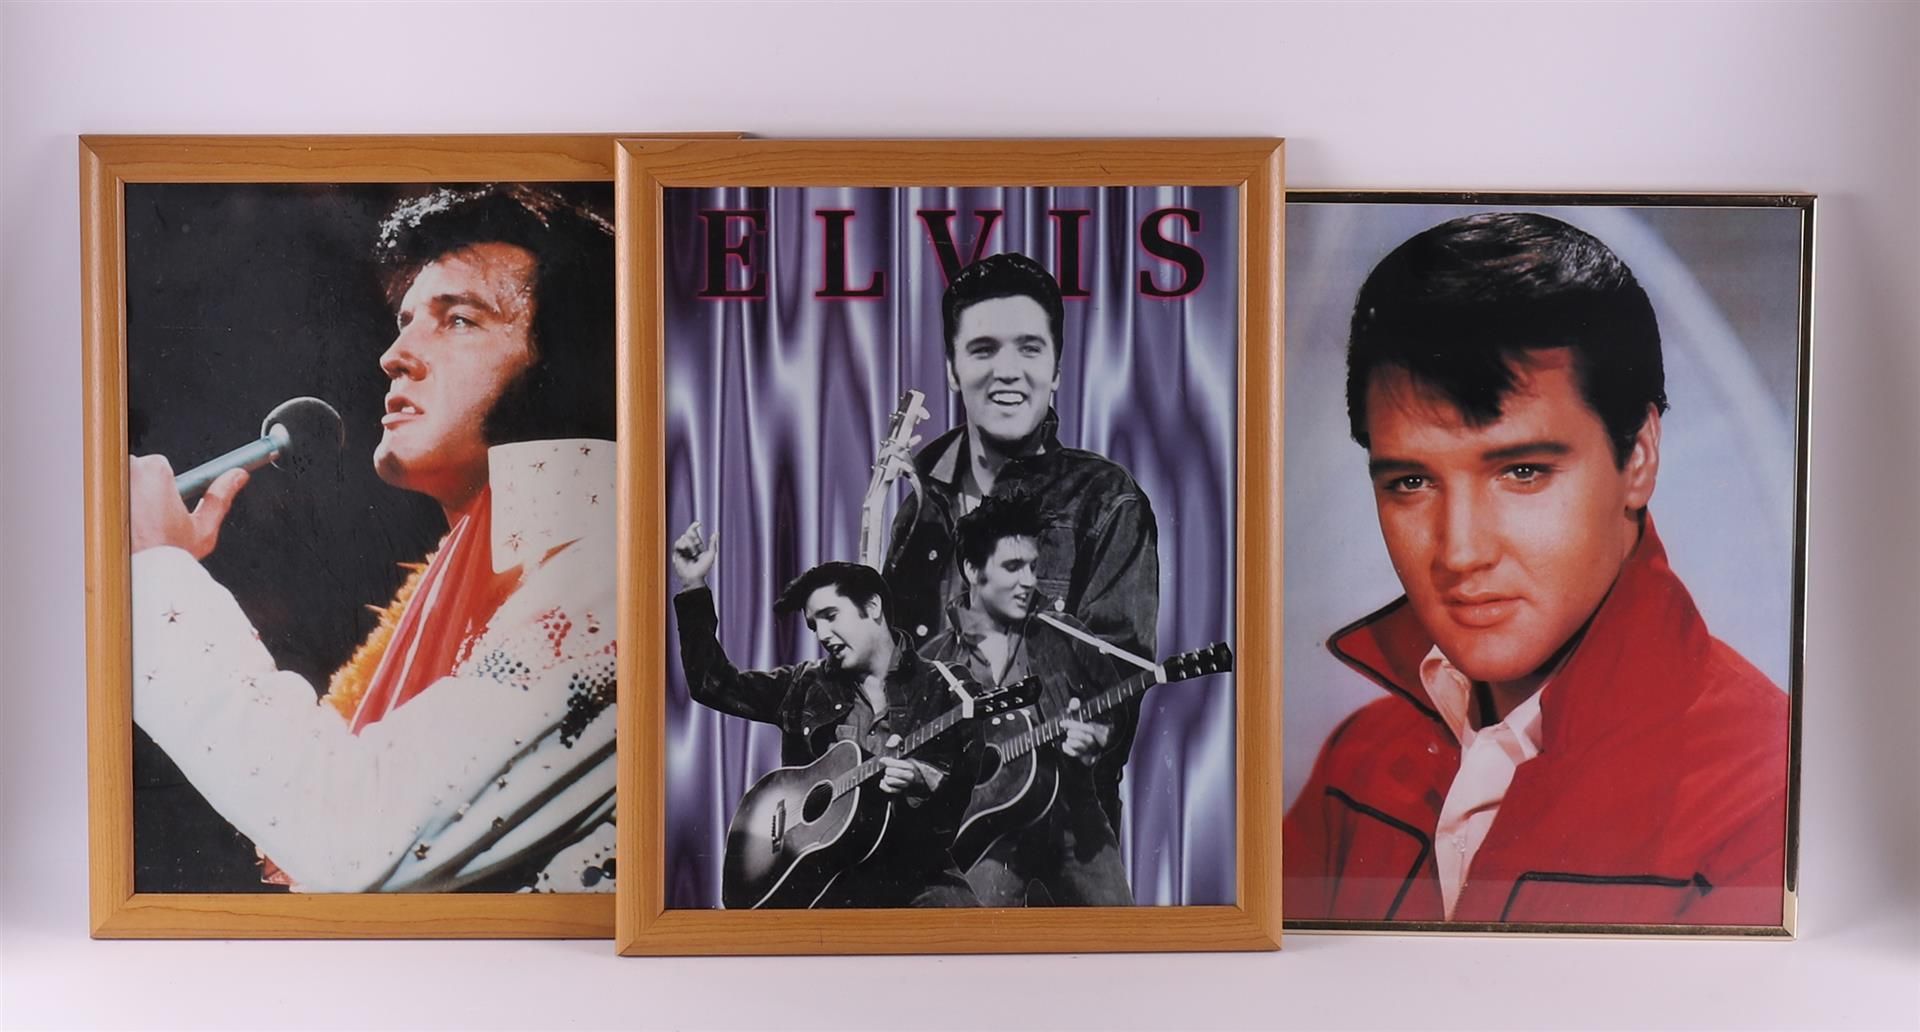 A lot of various Elvis Presley memorablia, posters and puzzles as posters. - Image 4 of 4